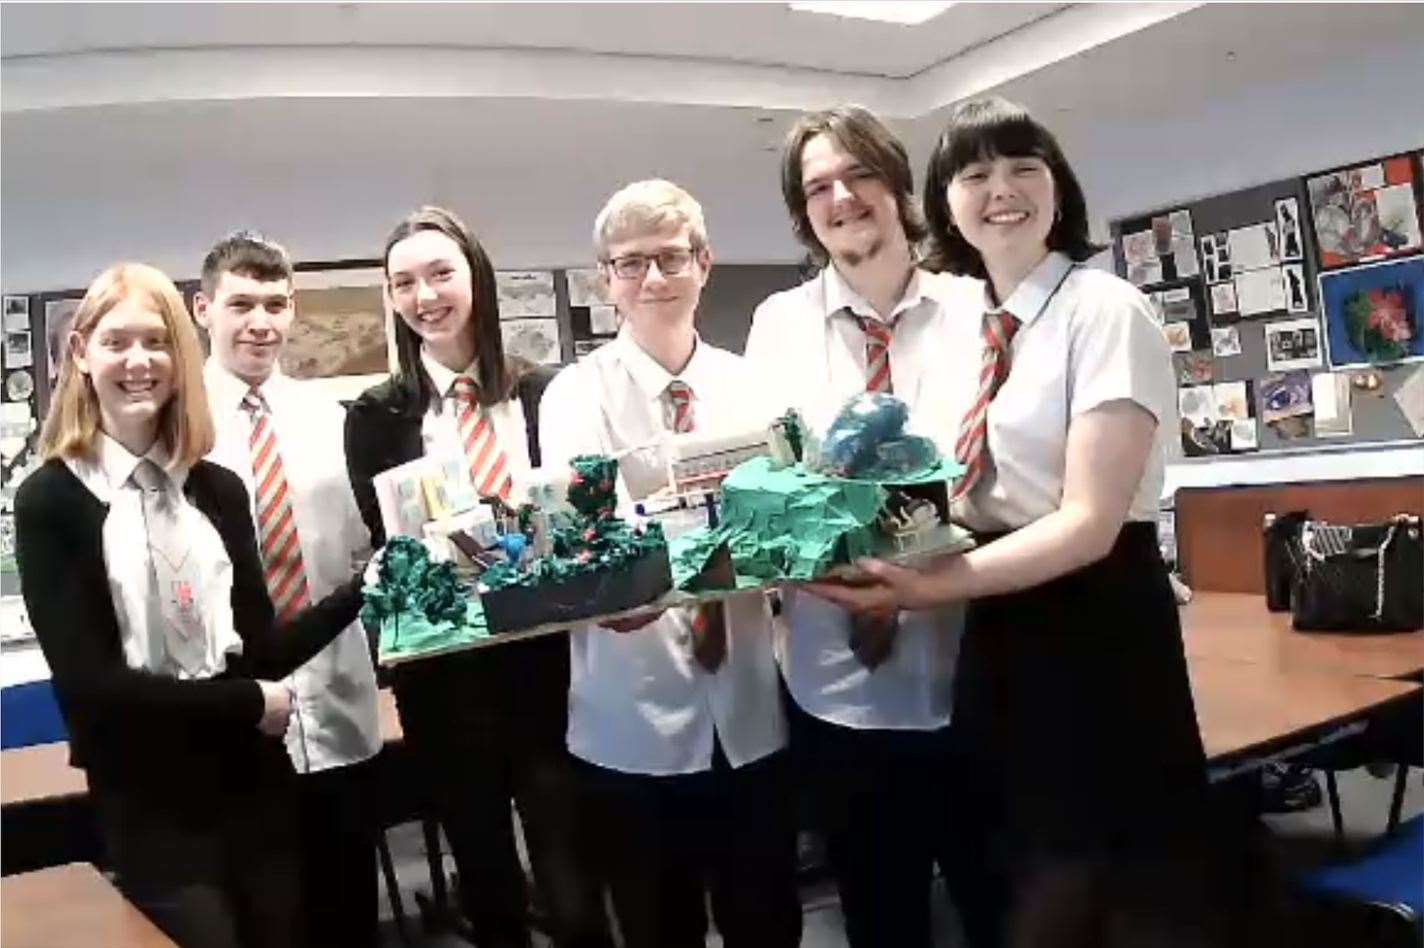 The winning team hailed from Carnoustie High School.